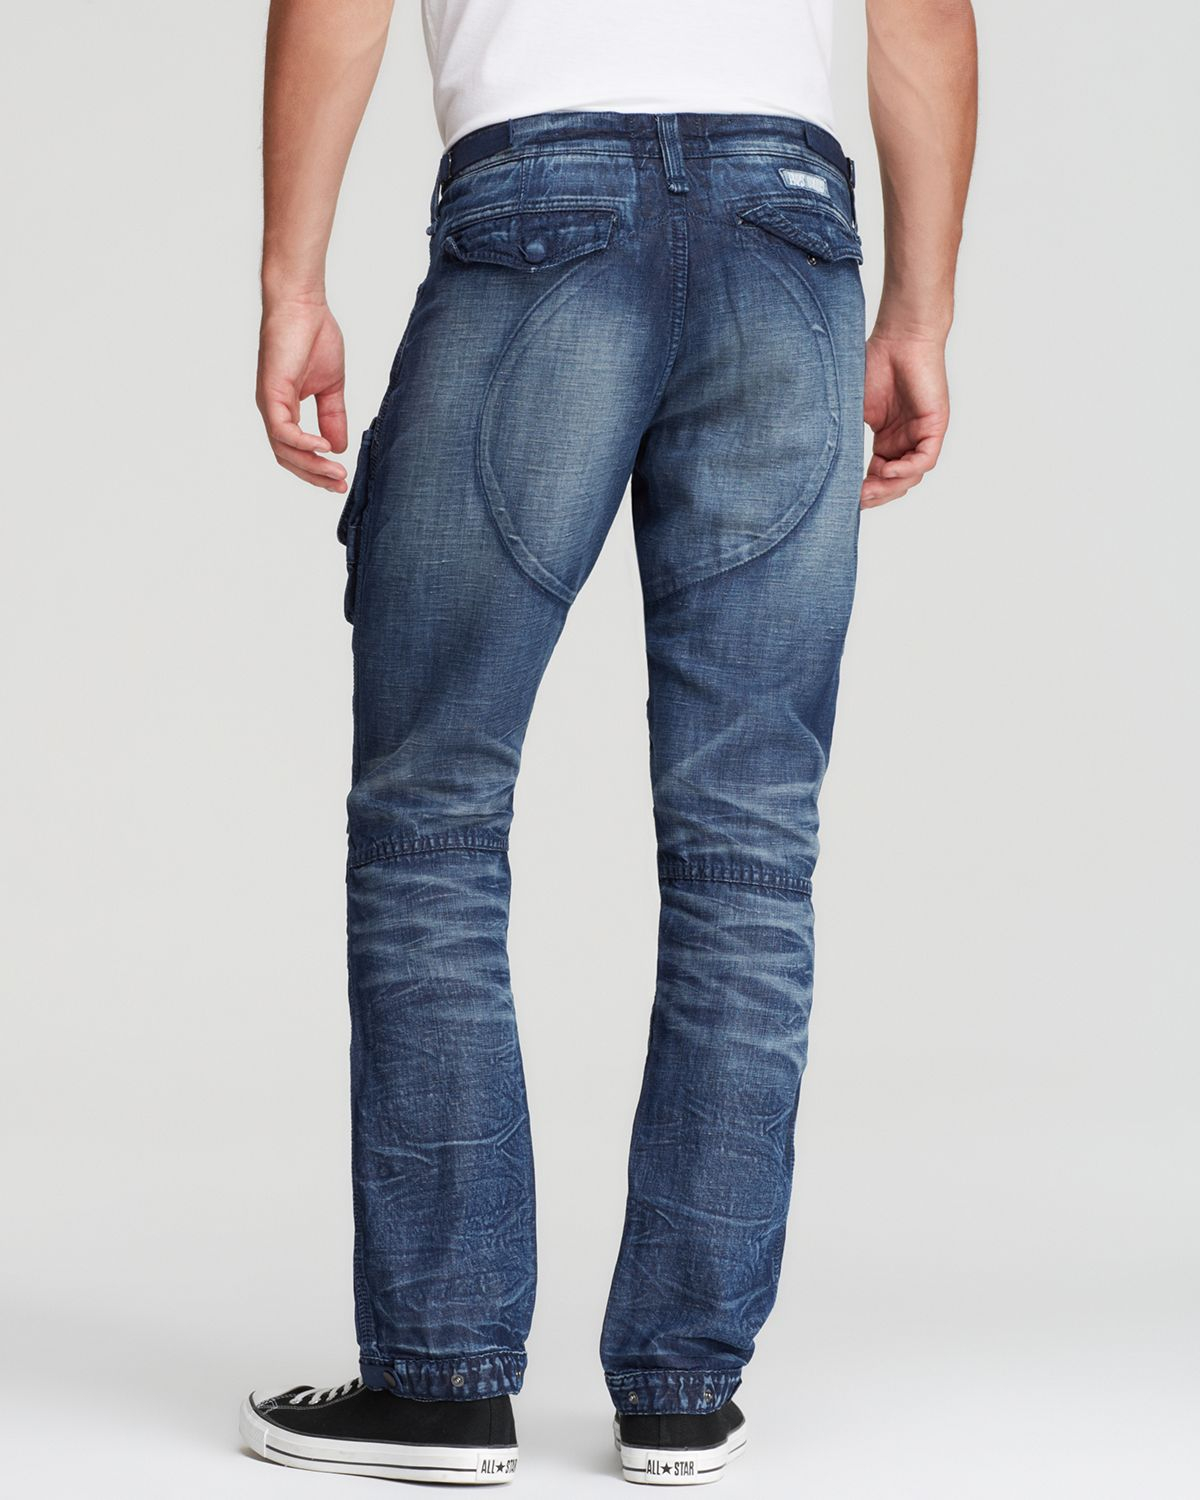 Lyst - Prps Jeans - Course Cargo Straight Fit In Distressed Medium Wash ...